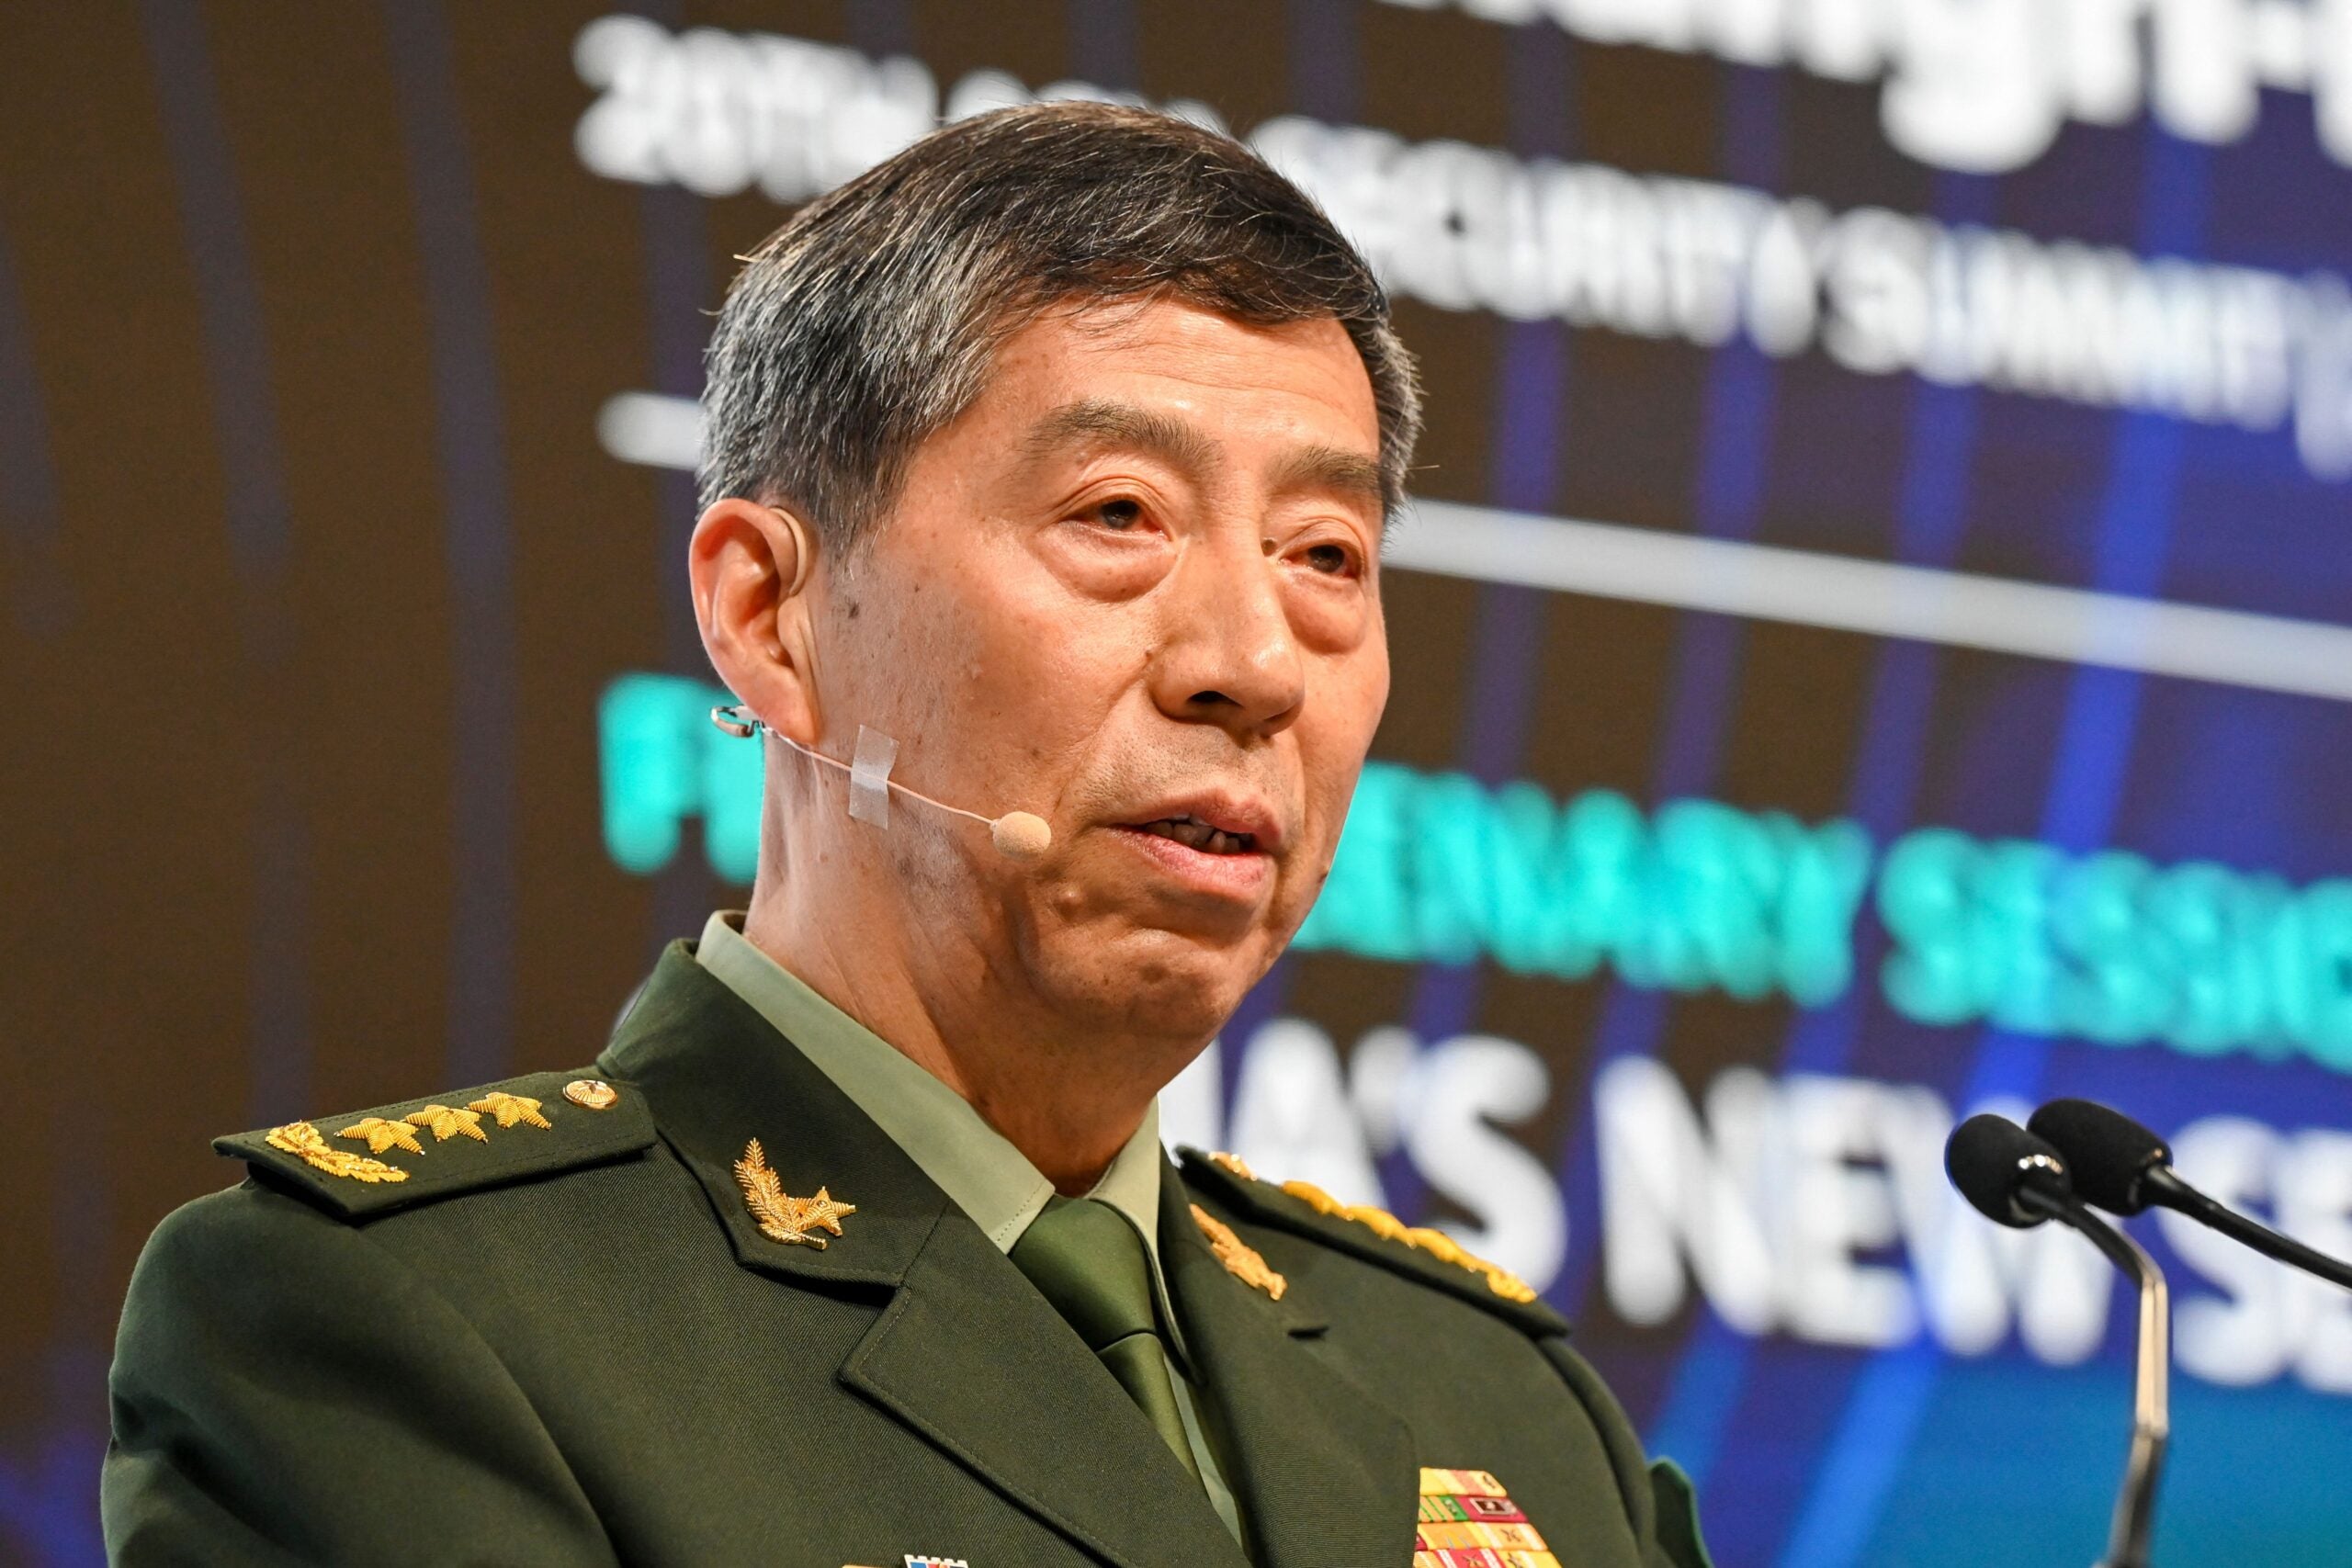 China's Minister of National Defence Li Shangfu delivers a speech during the 20th Shangri-La Dialogue summit in Singapore on June 4, 2023. (Photo by Roslan RAHMAN / AFP) (Photo by ROSLAN RAHMAN/AFP via Getty Images)